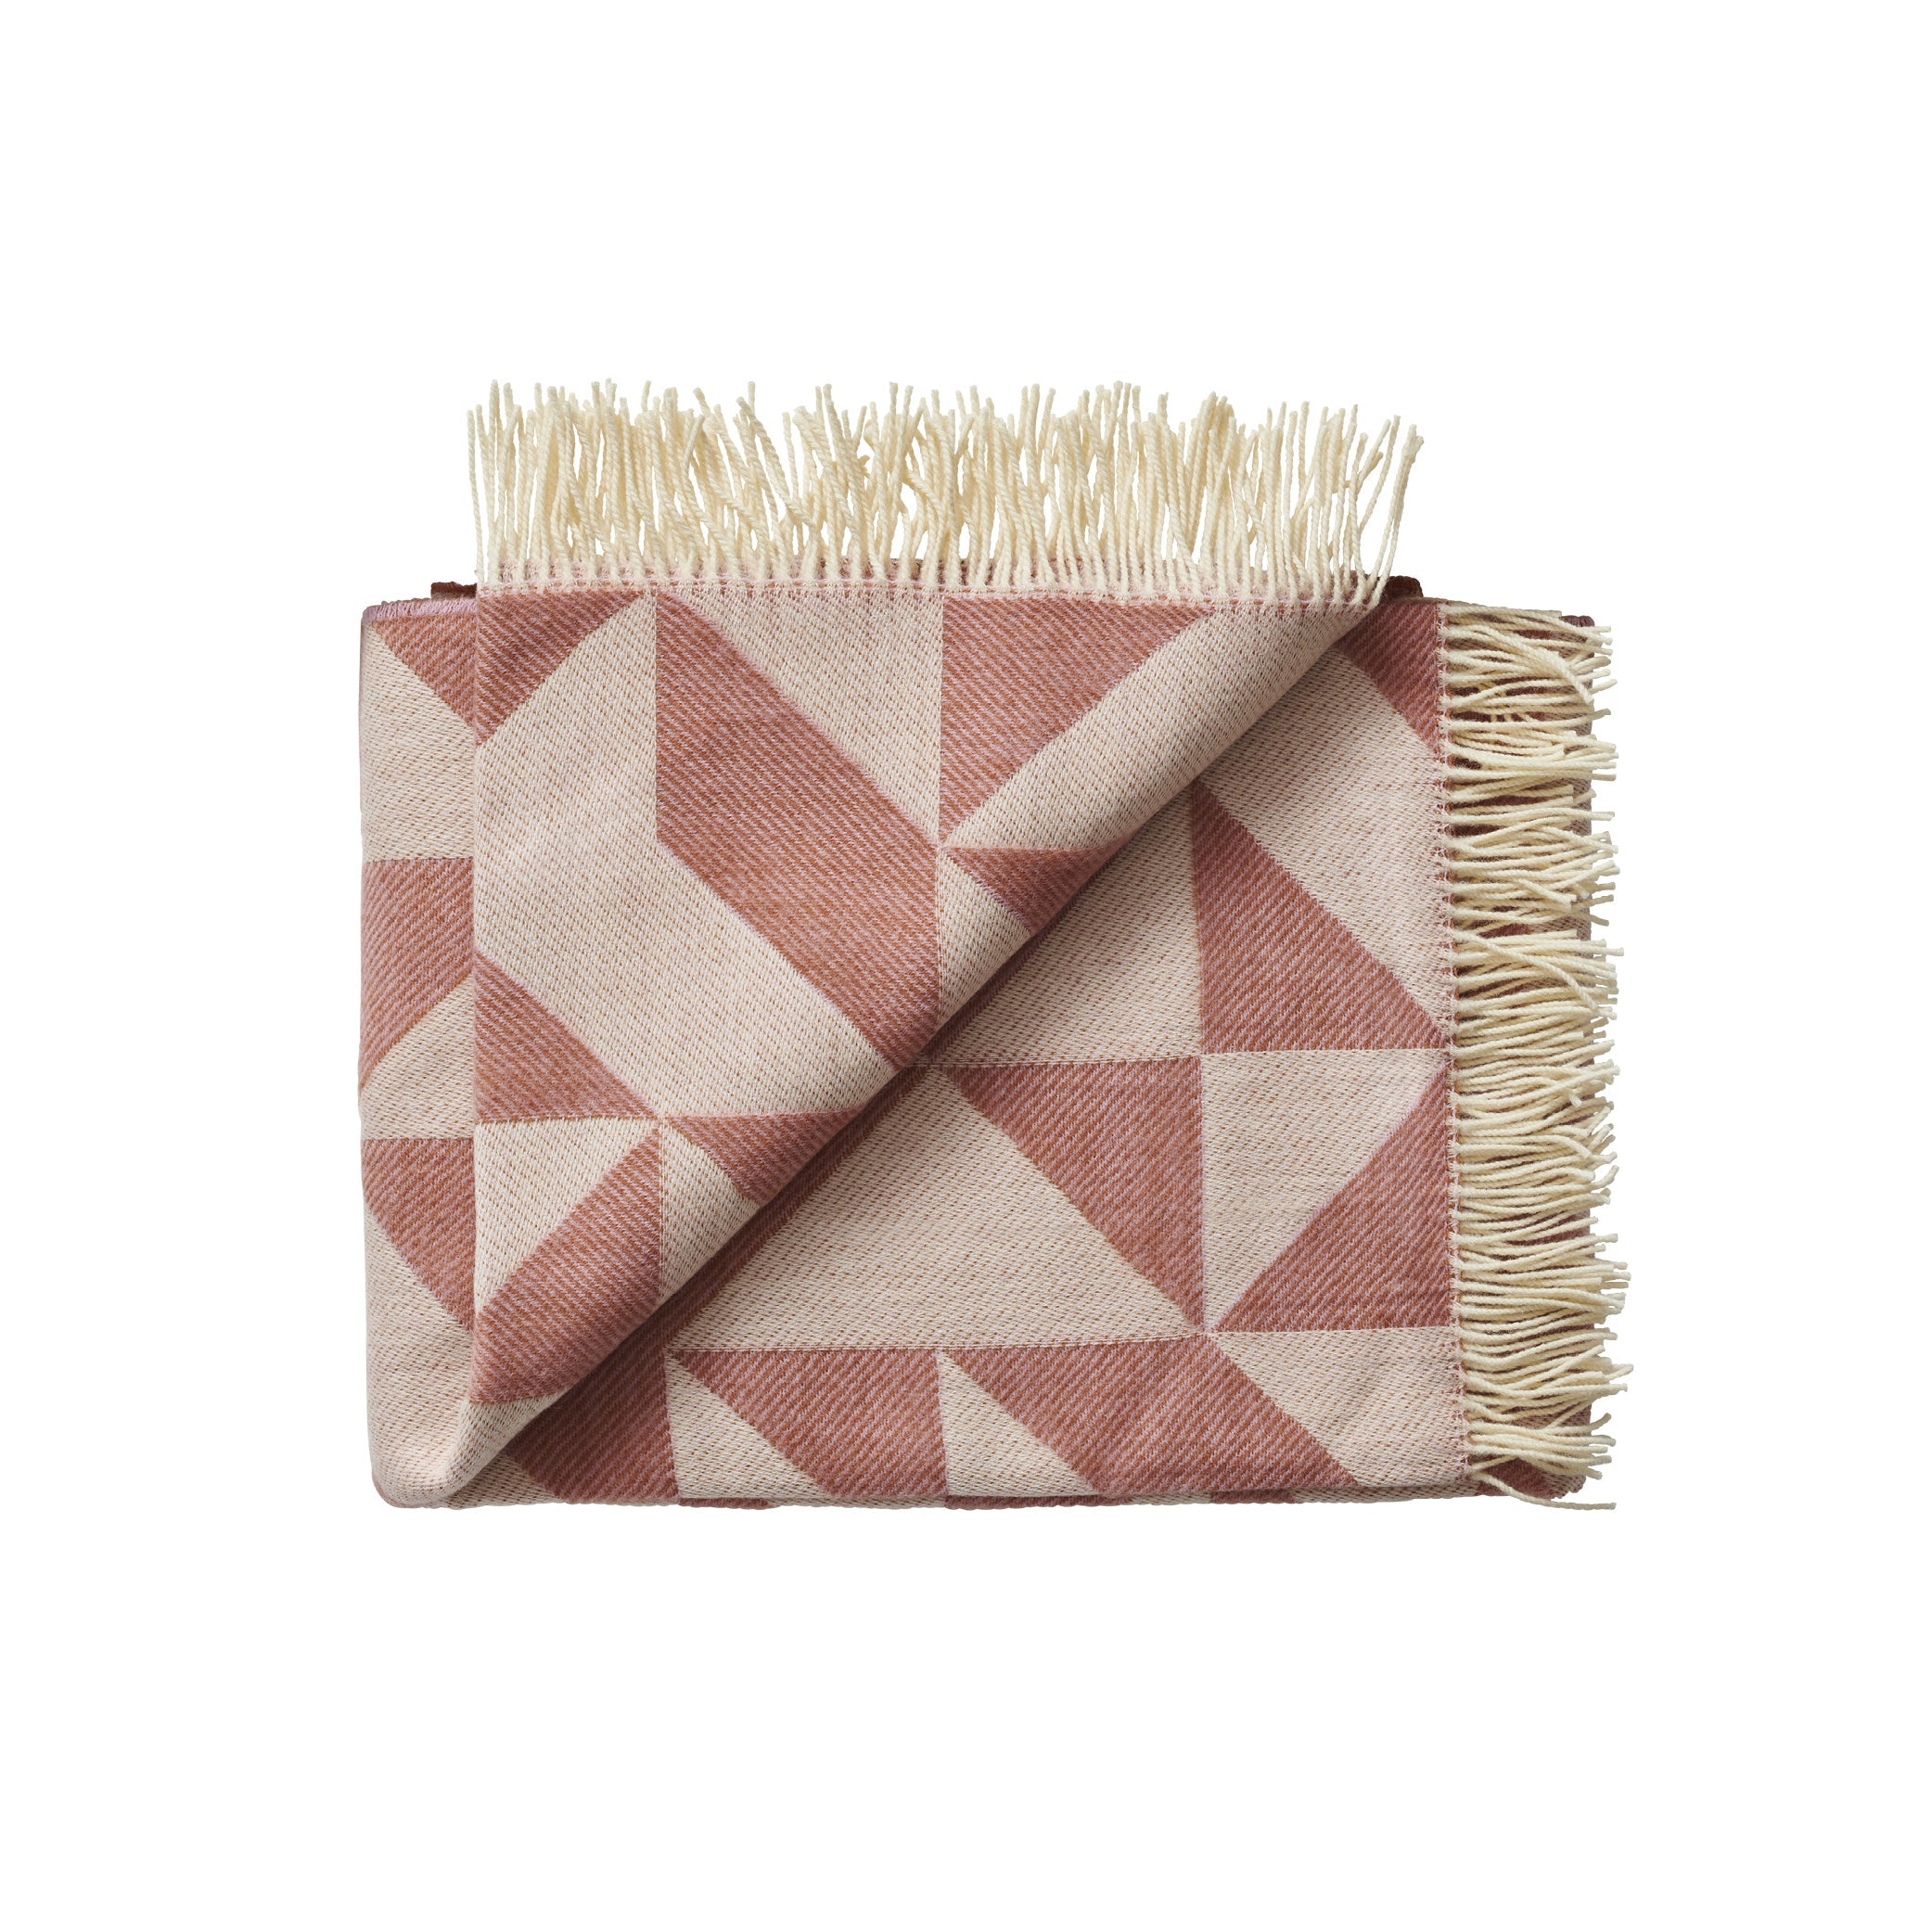 SILKEBORG ULDSPINDRIE TWICK TRAKY PLAID, Dusty Rose